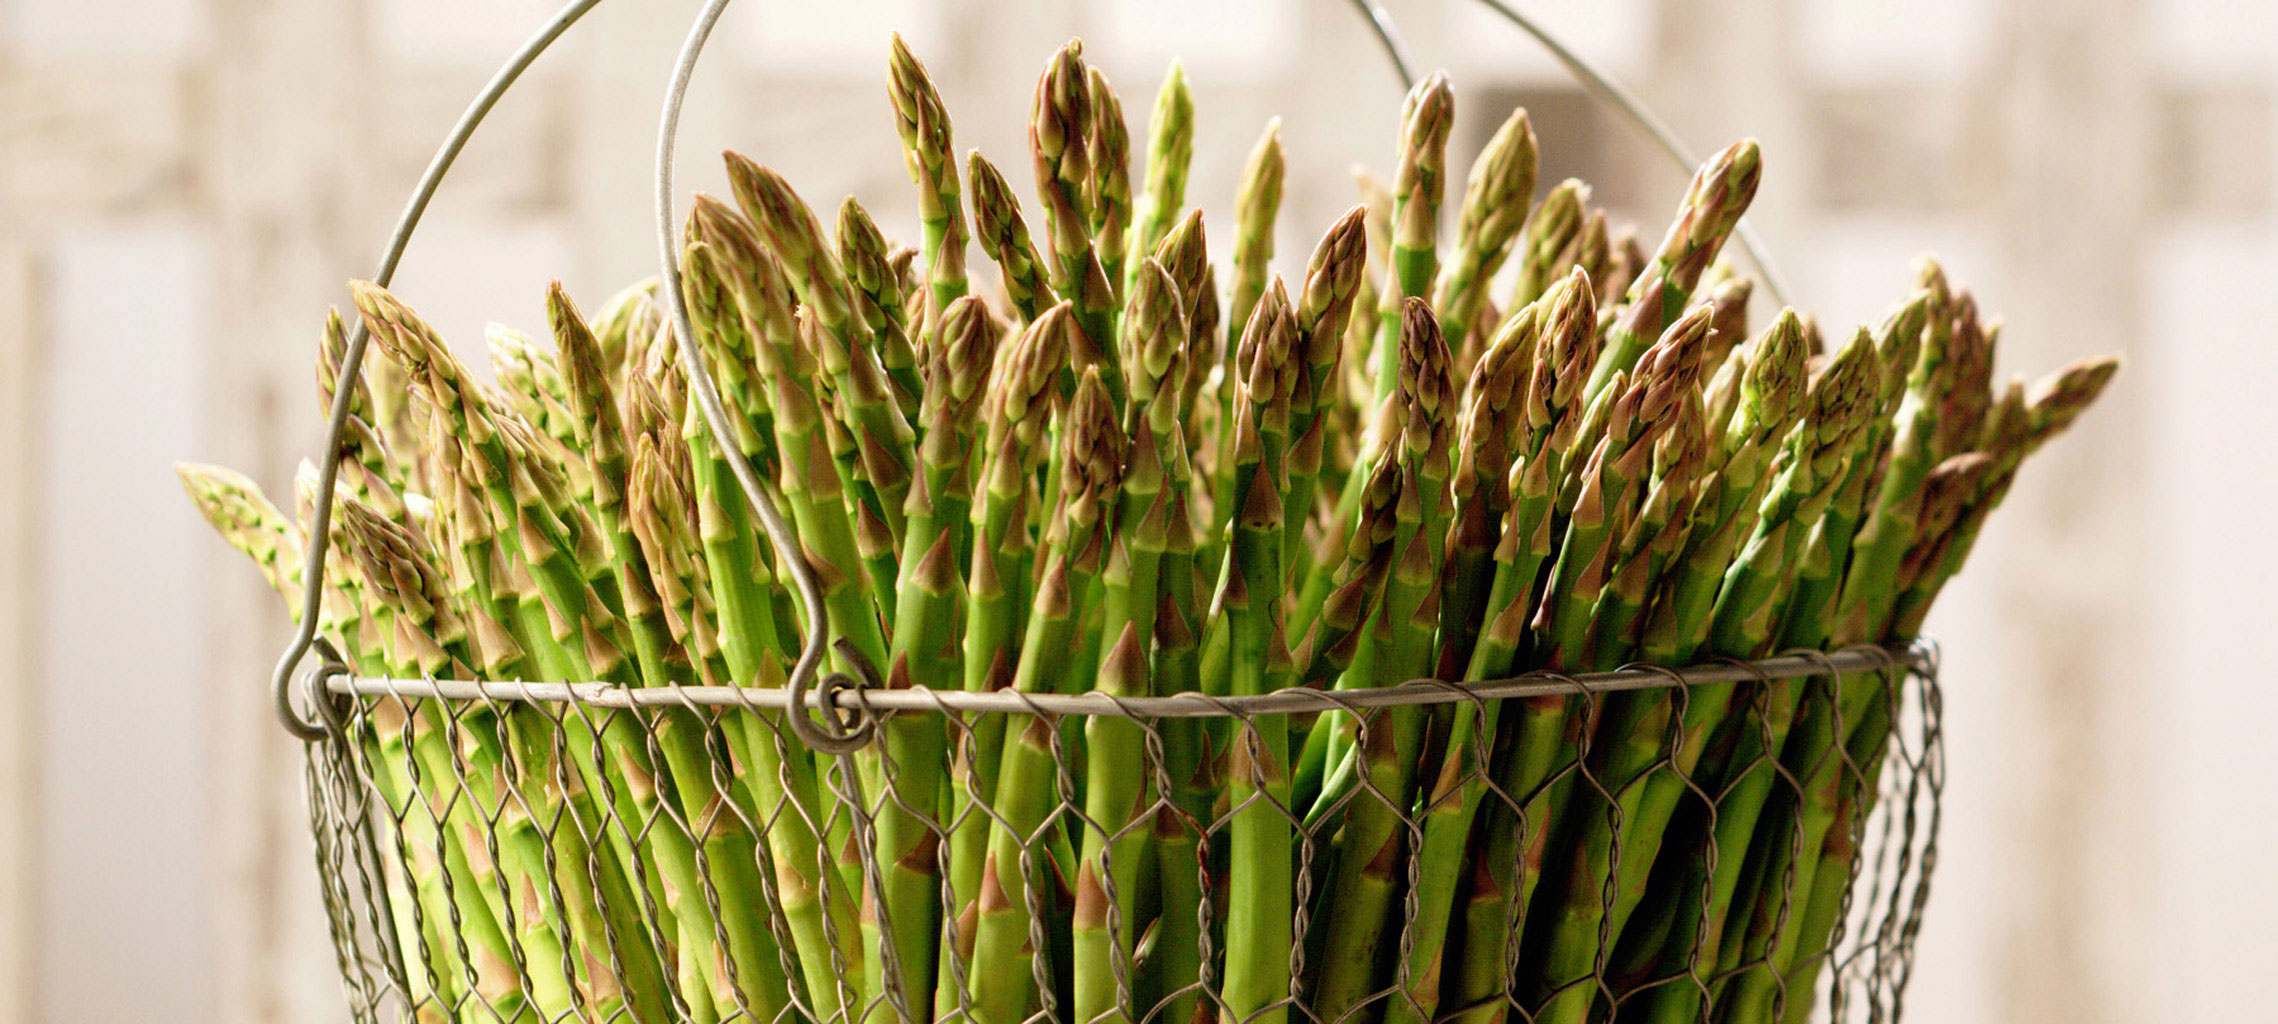 Beautiful-food-photography-of-green-Asparagus-in-wire-basket